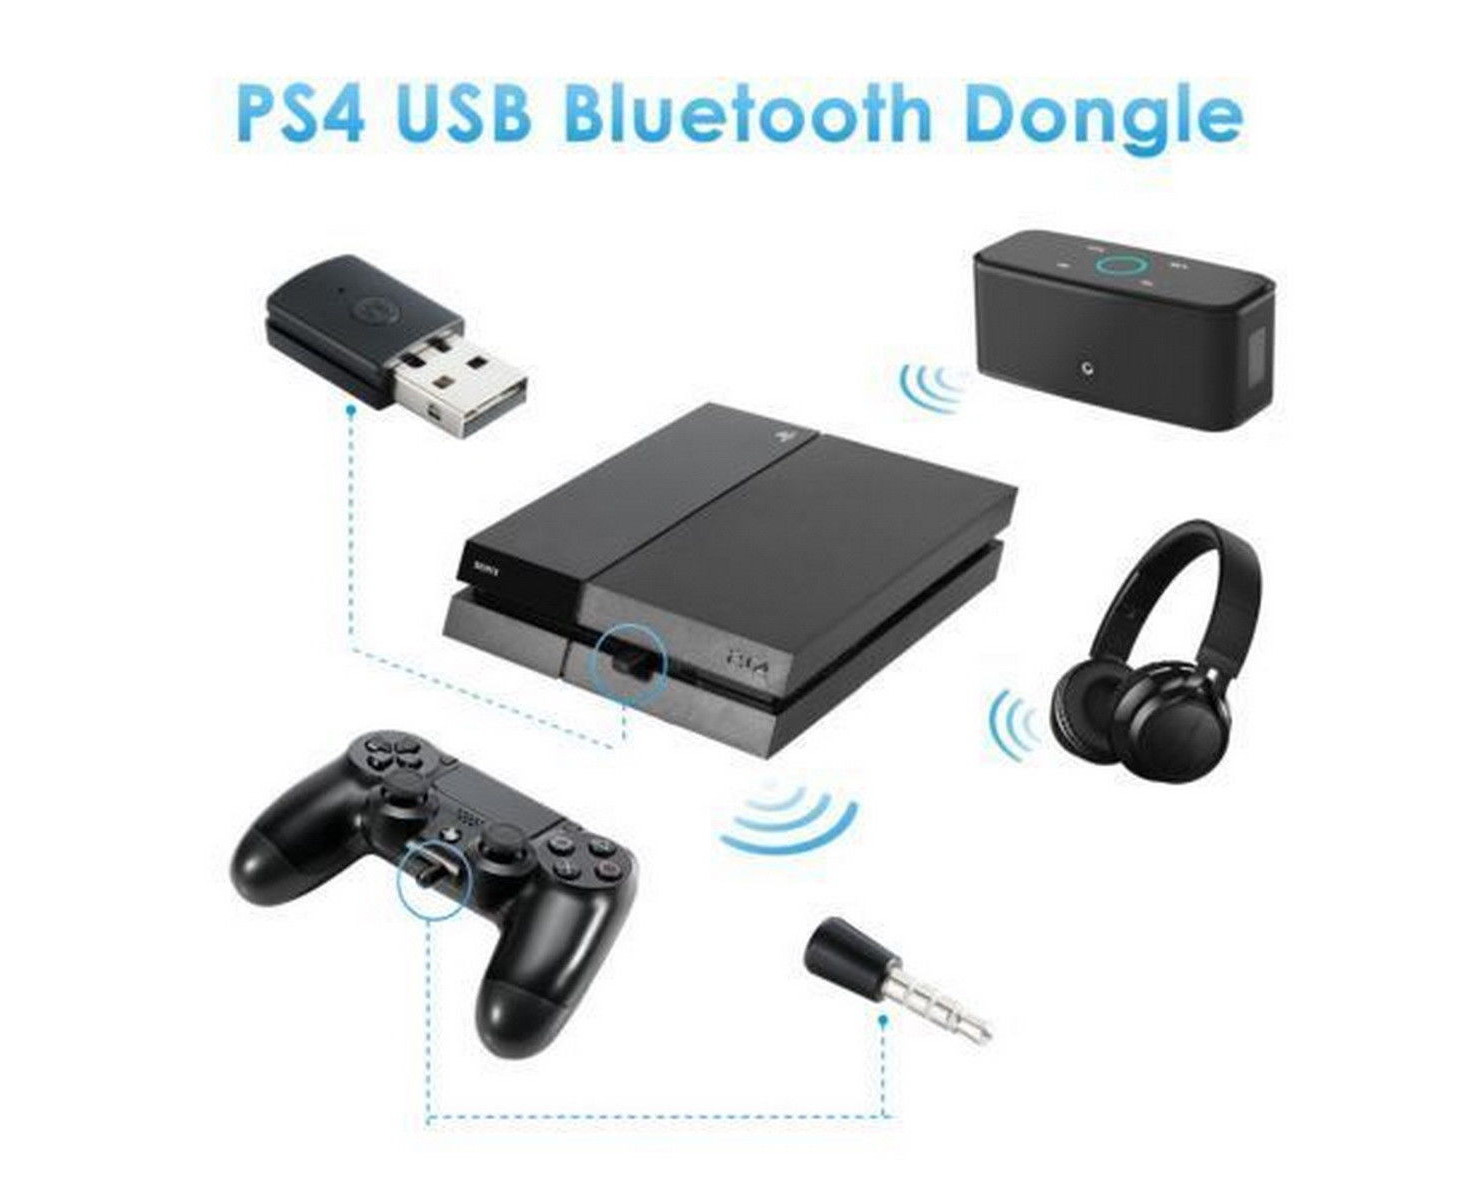 Mig selv Serrated kaptajn Wireless Bluetooth USB Adapter Dongle 4.0 Receiver for Playstation 4 PS4  Headphone Microphone | Catch.com.au